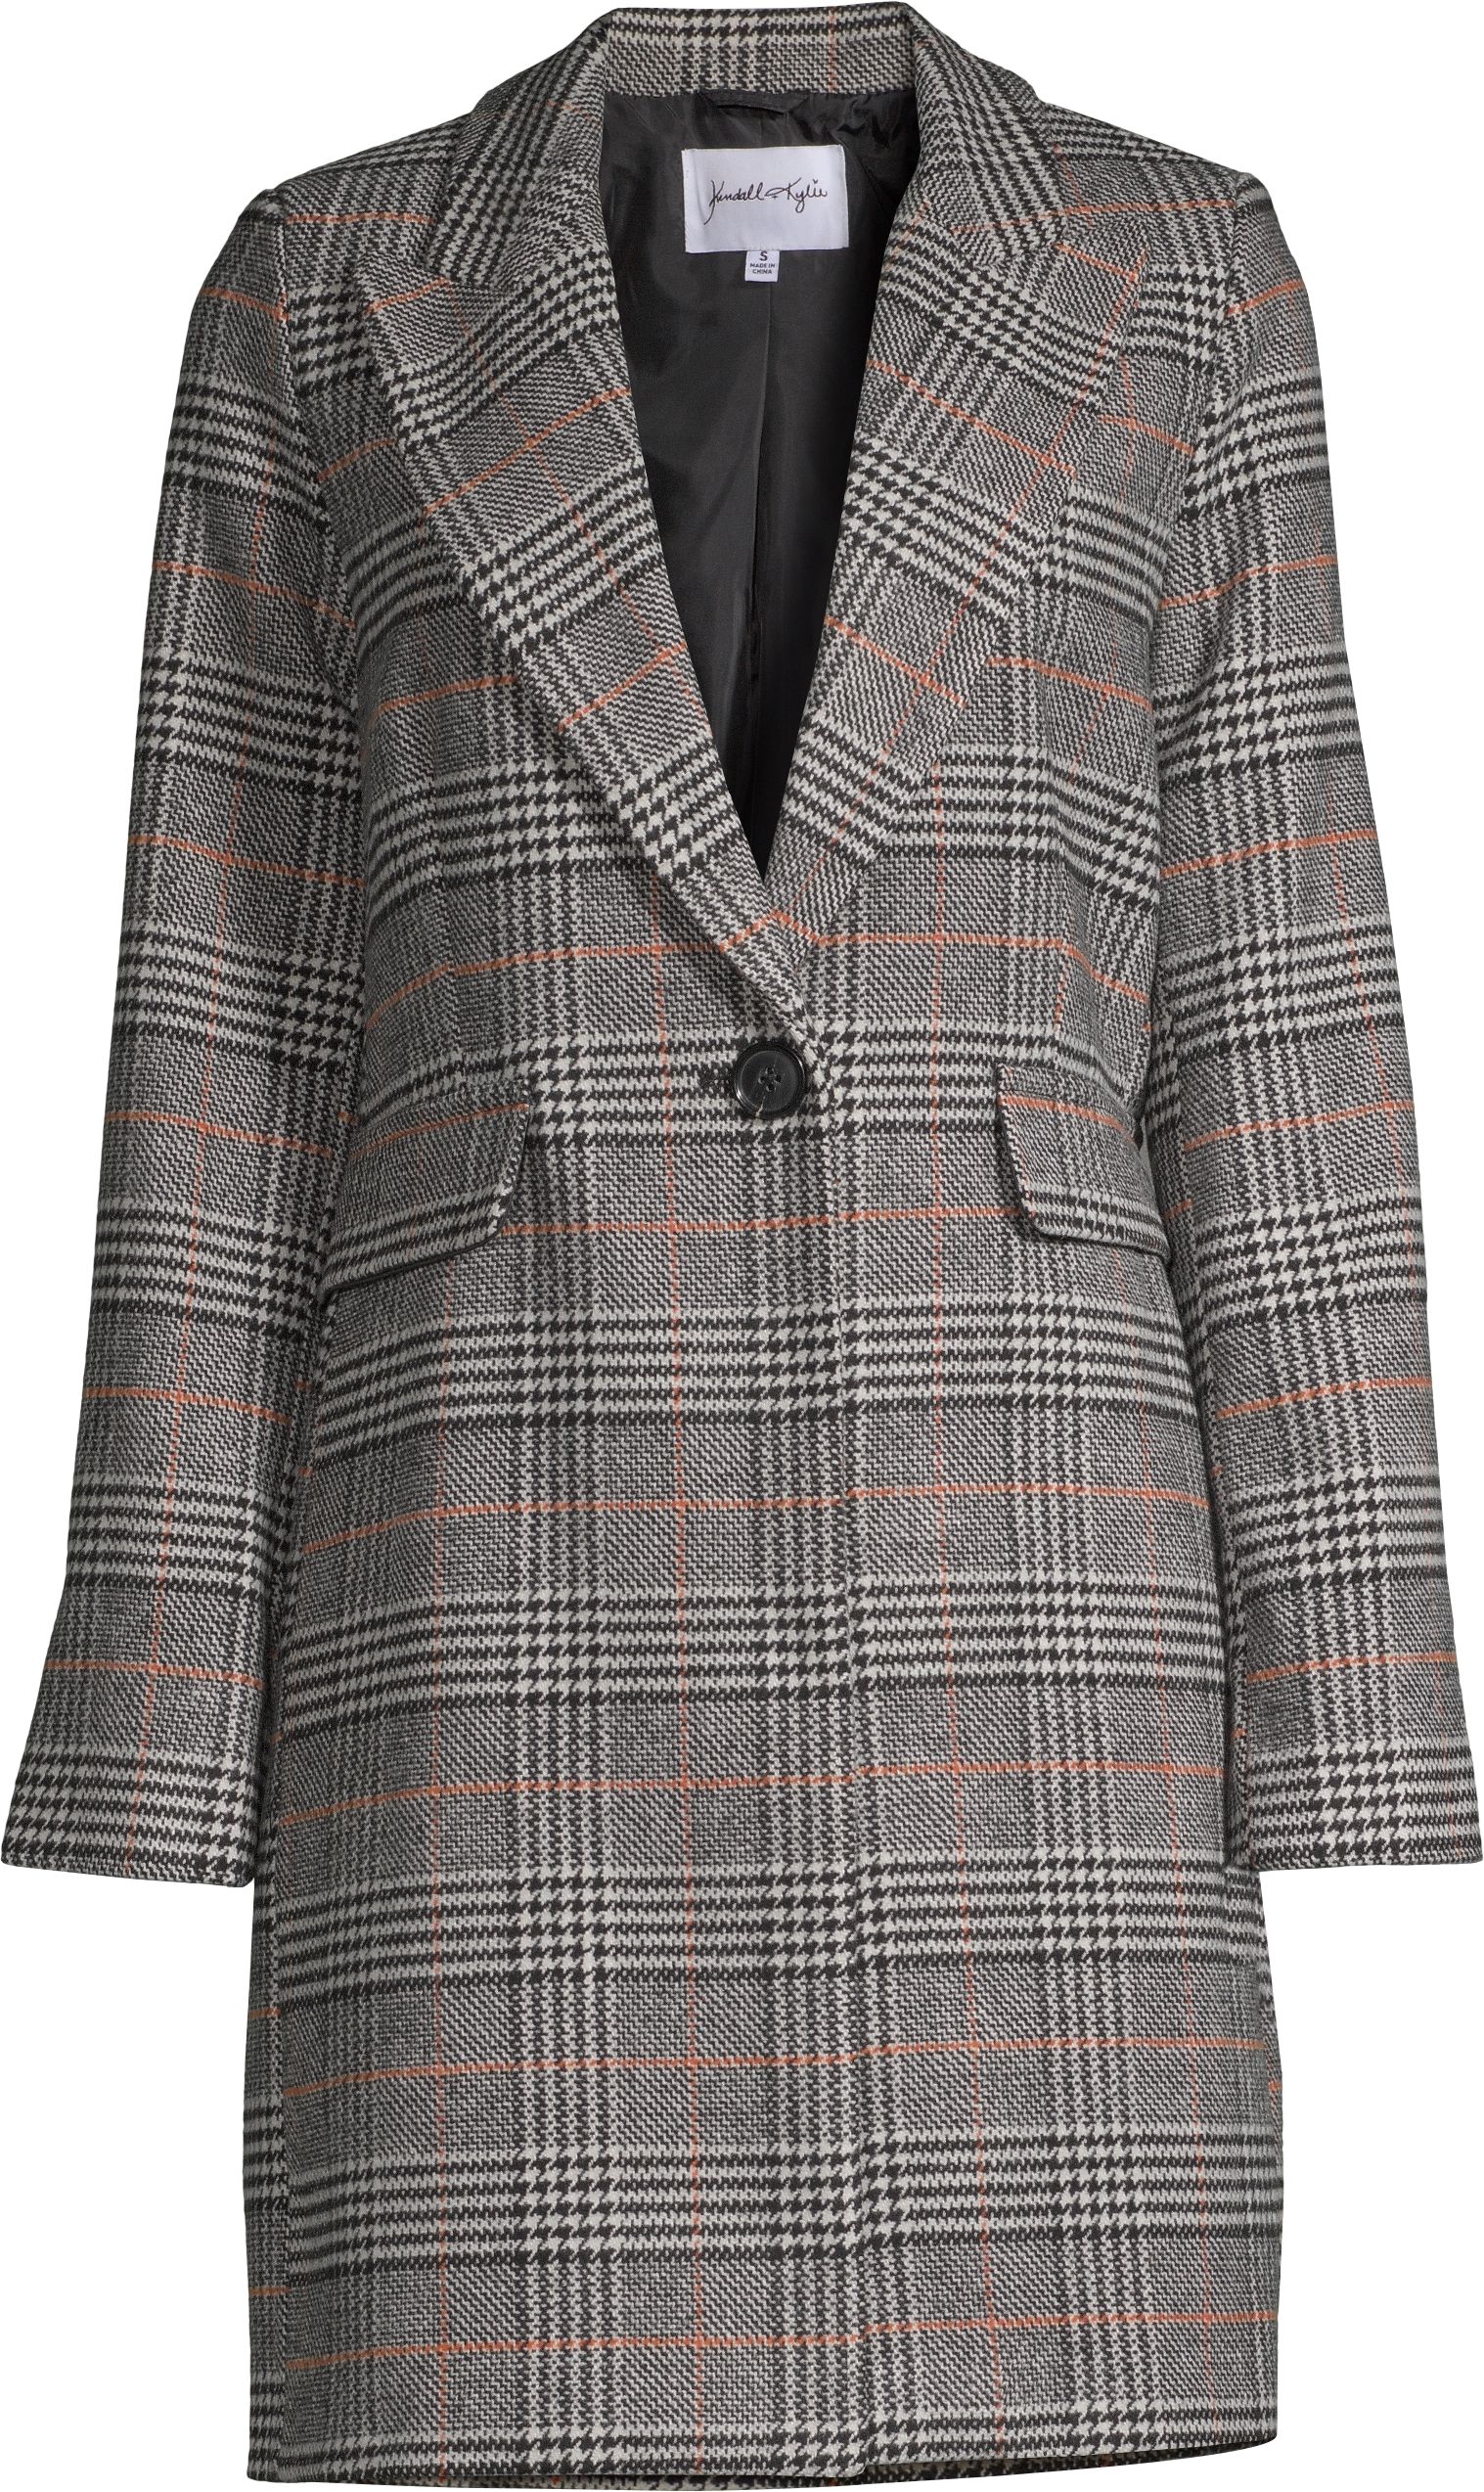 Kendall + Kylie Women's Plaid Coat - image 2 of 6